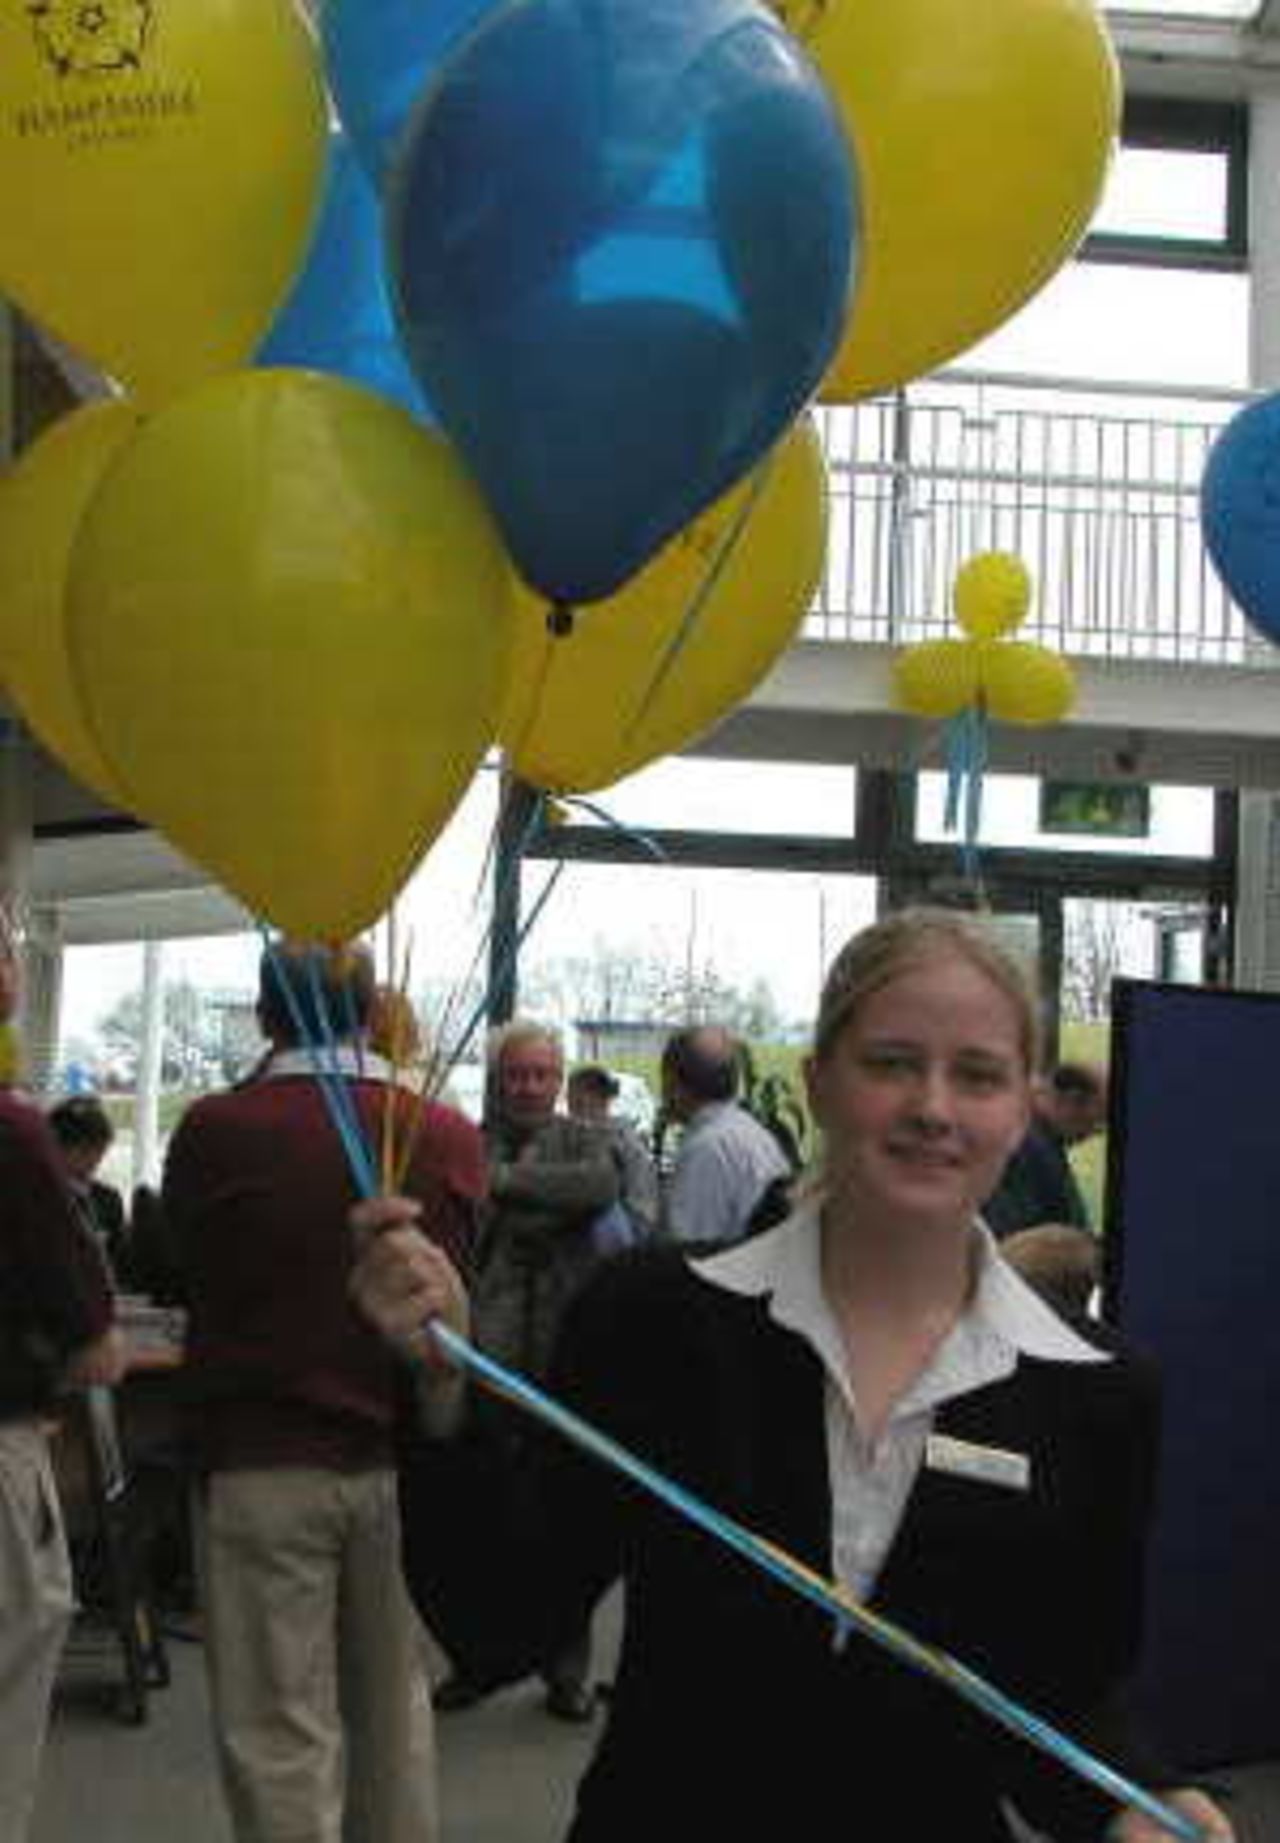 Gemma carries the baloons at the start of the day.